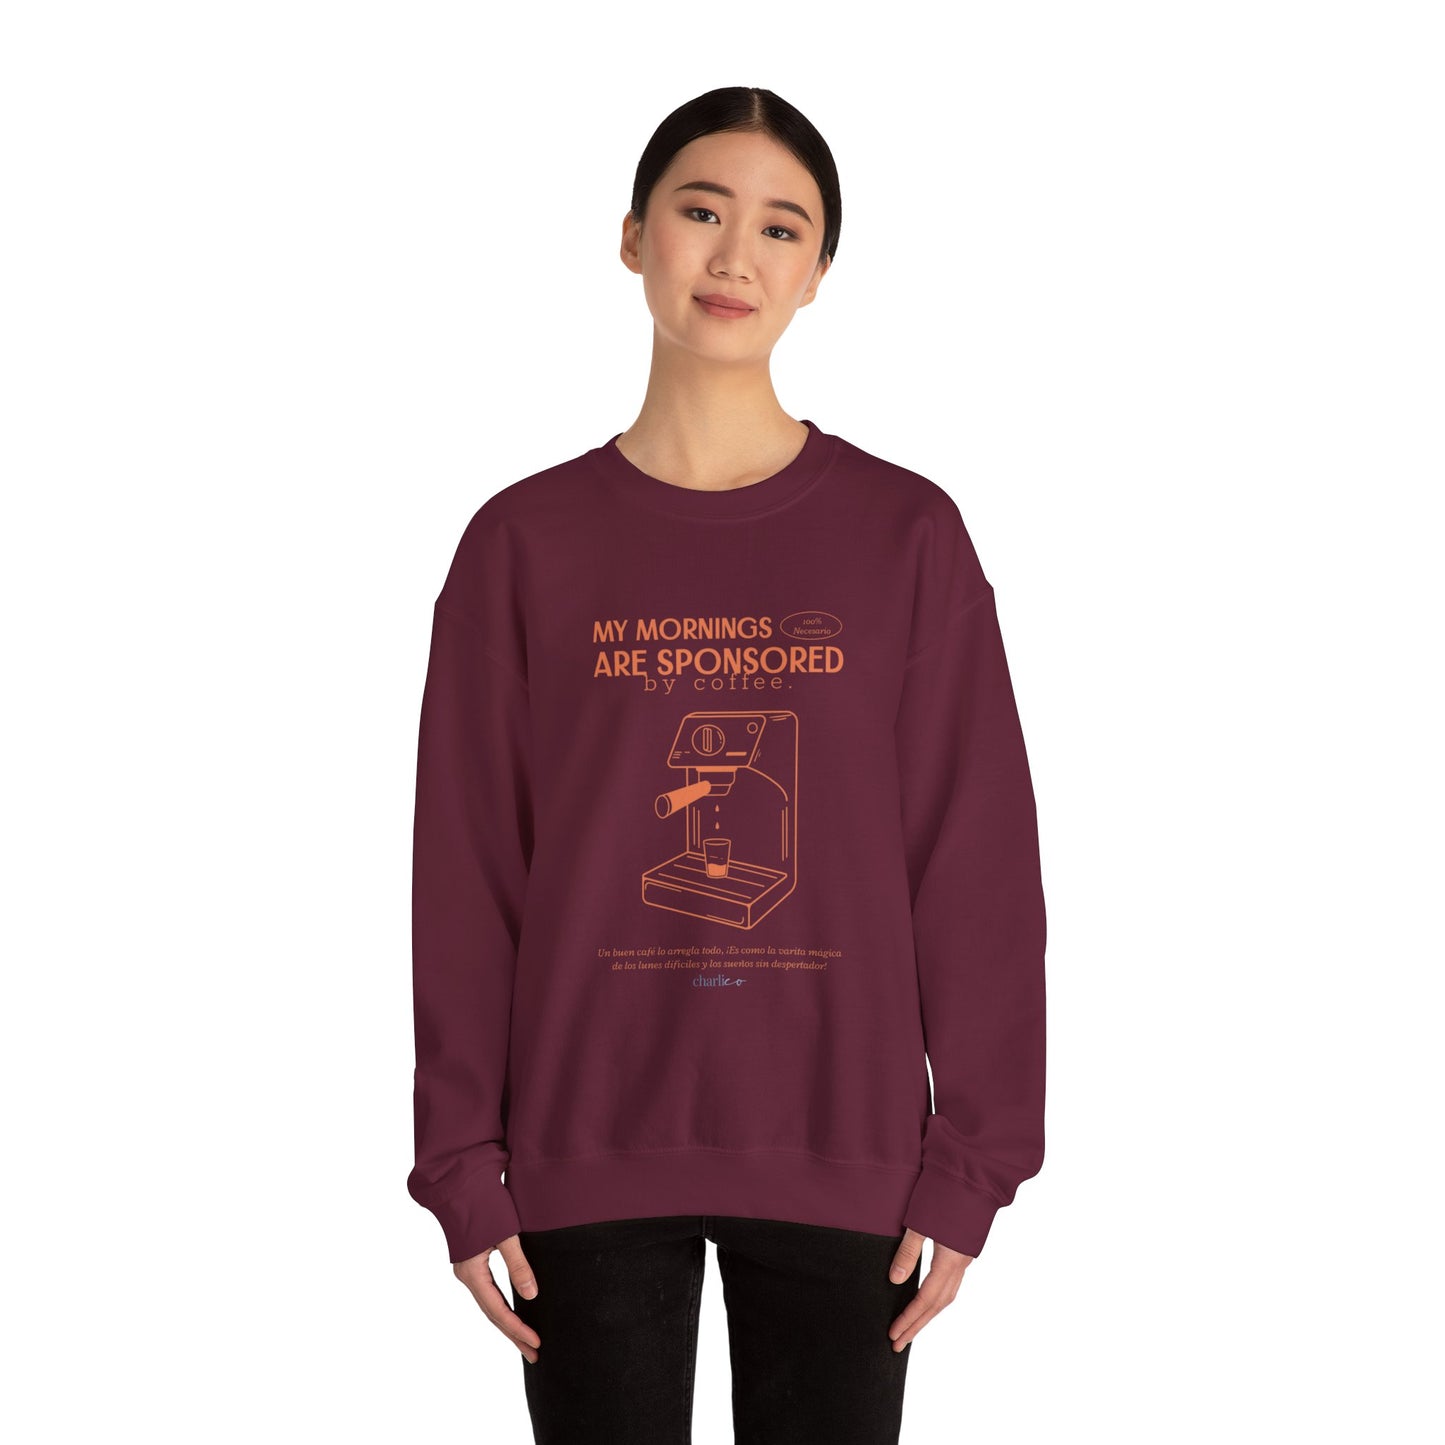 Crewneck sweatshirt -my morning are sponsored by coffee- for adults